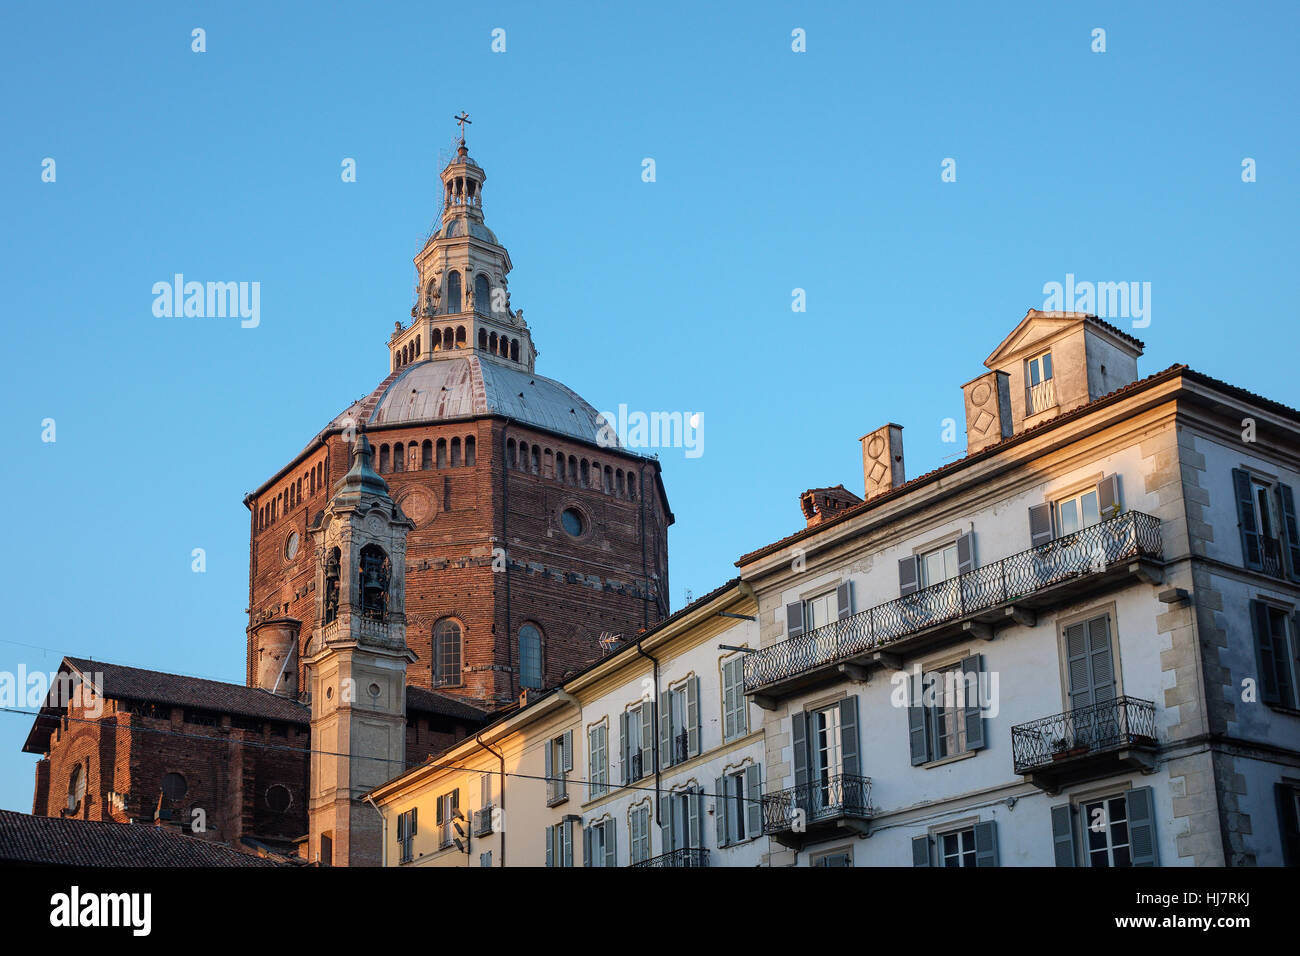 The Cathedral of Pavia is a church in Pavia, Italy, the largest in the city and seat of the Diocese of Pavia. The construction was begun in the 15th c Stock Photo